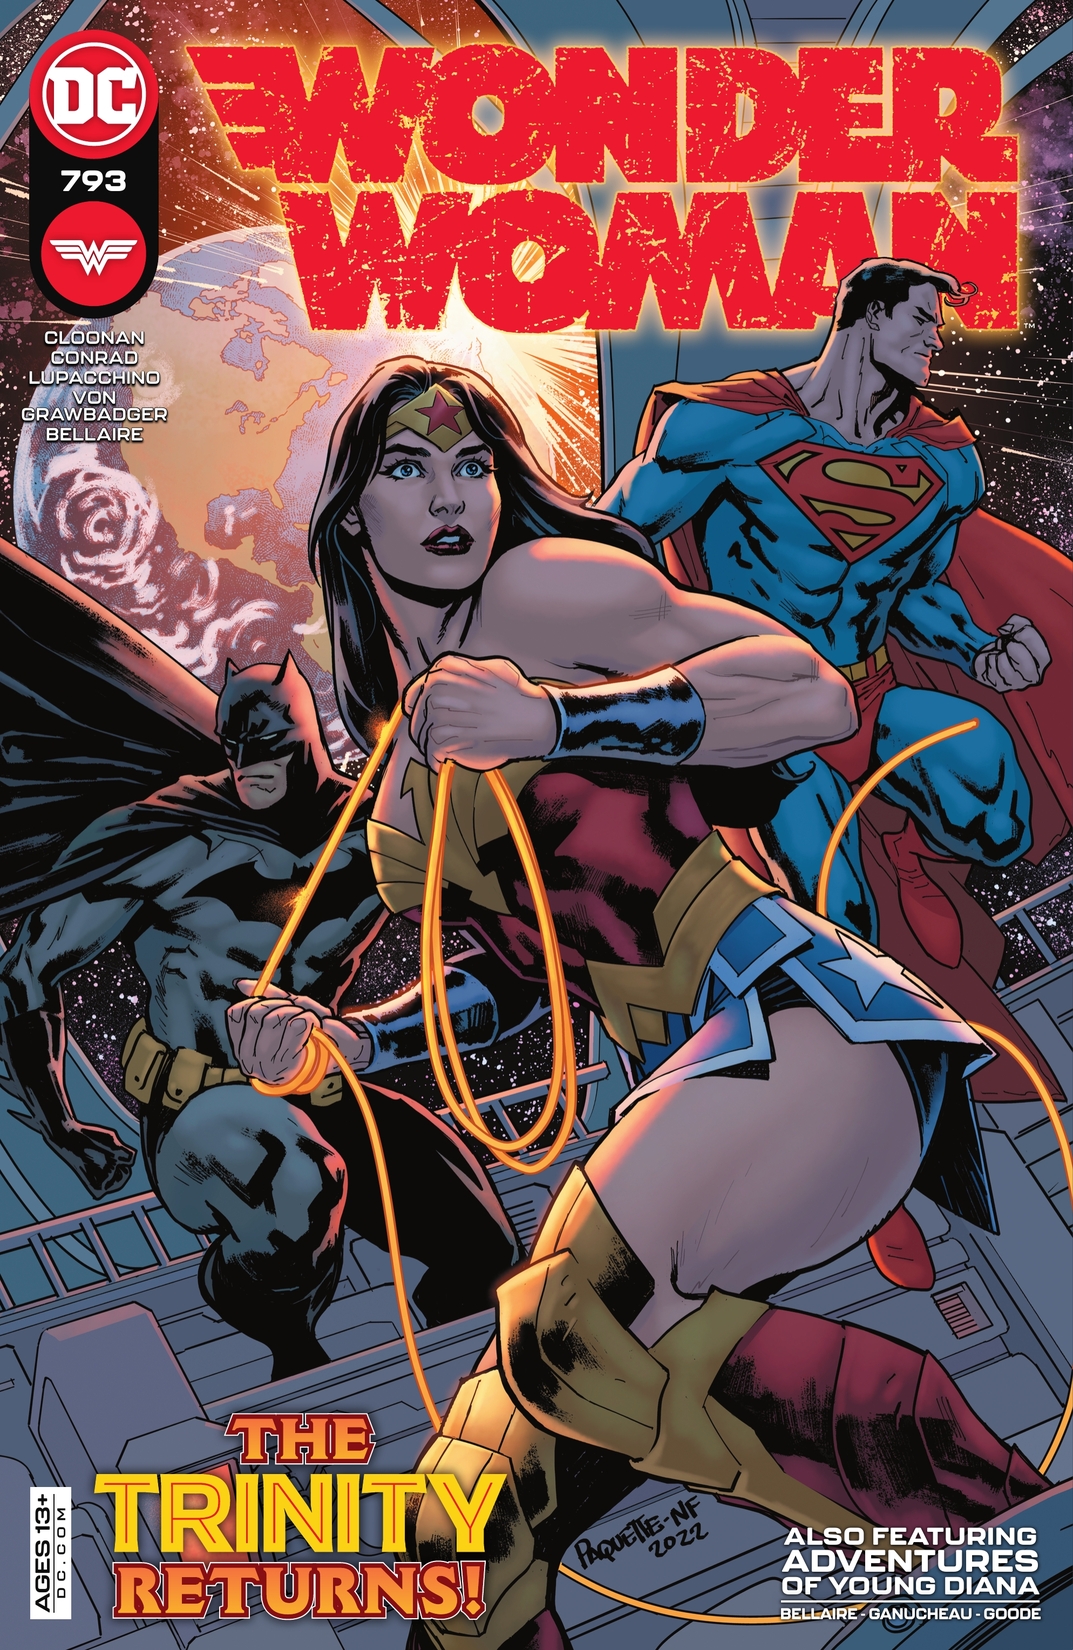 Wonder Woman (2016-) #793 preview images